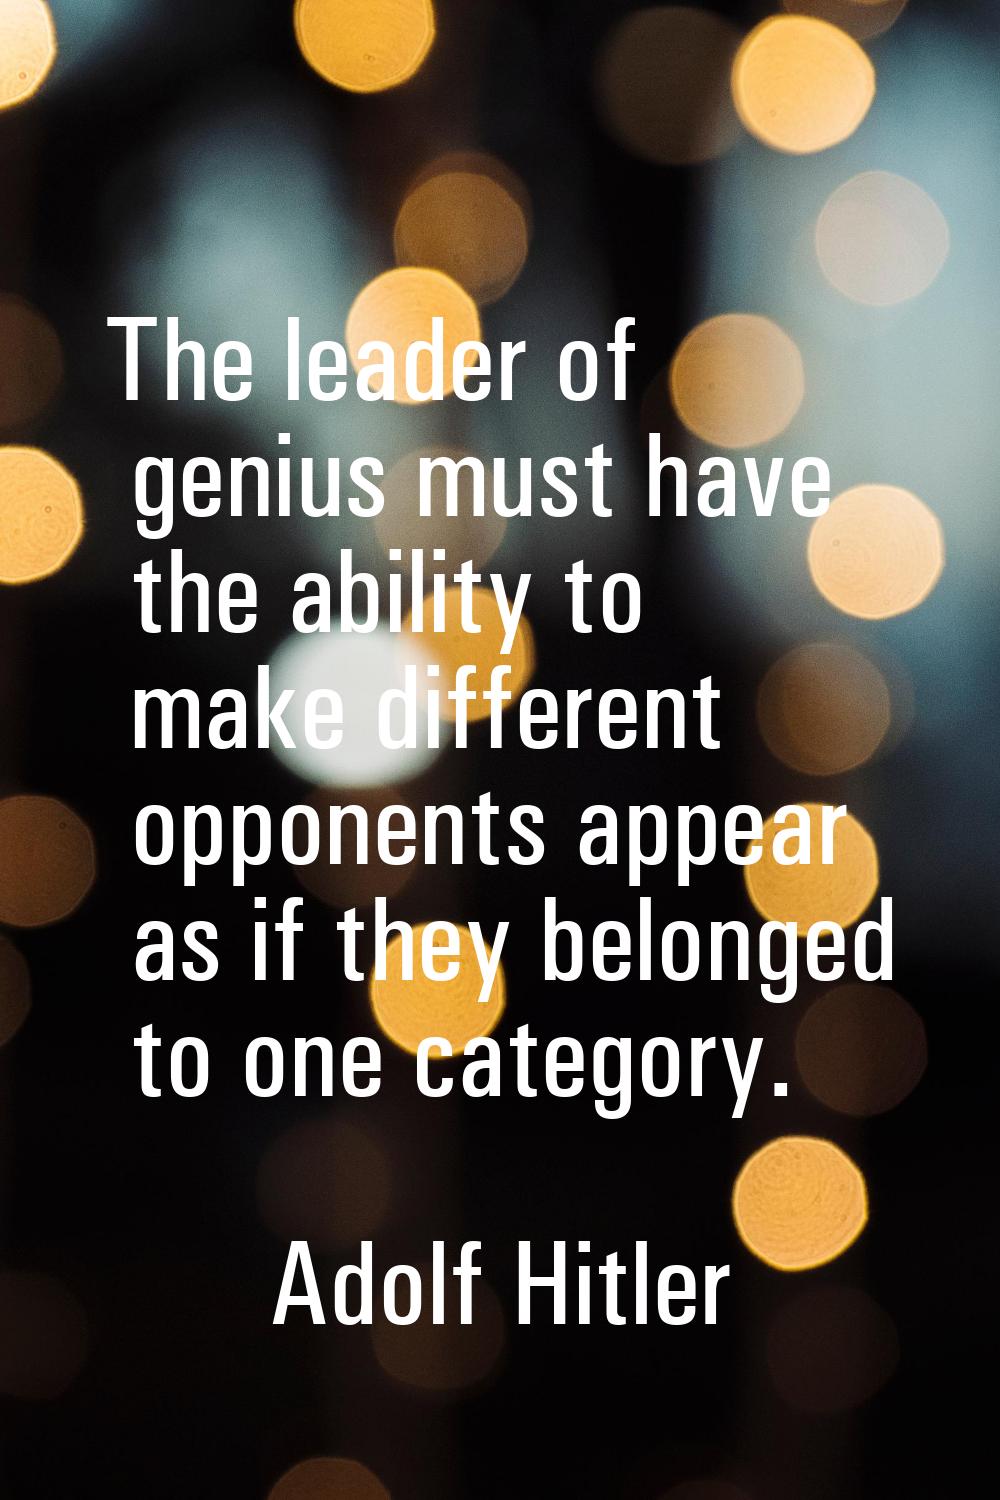 The leader of genius must have the ability to make different opponents appear as if they belonged t